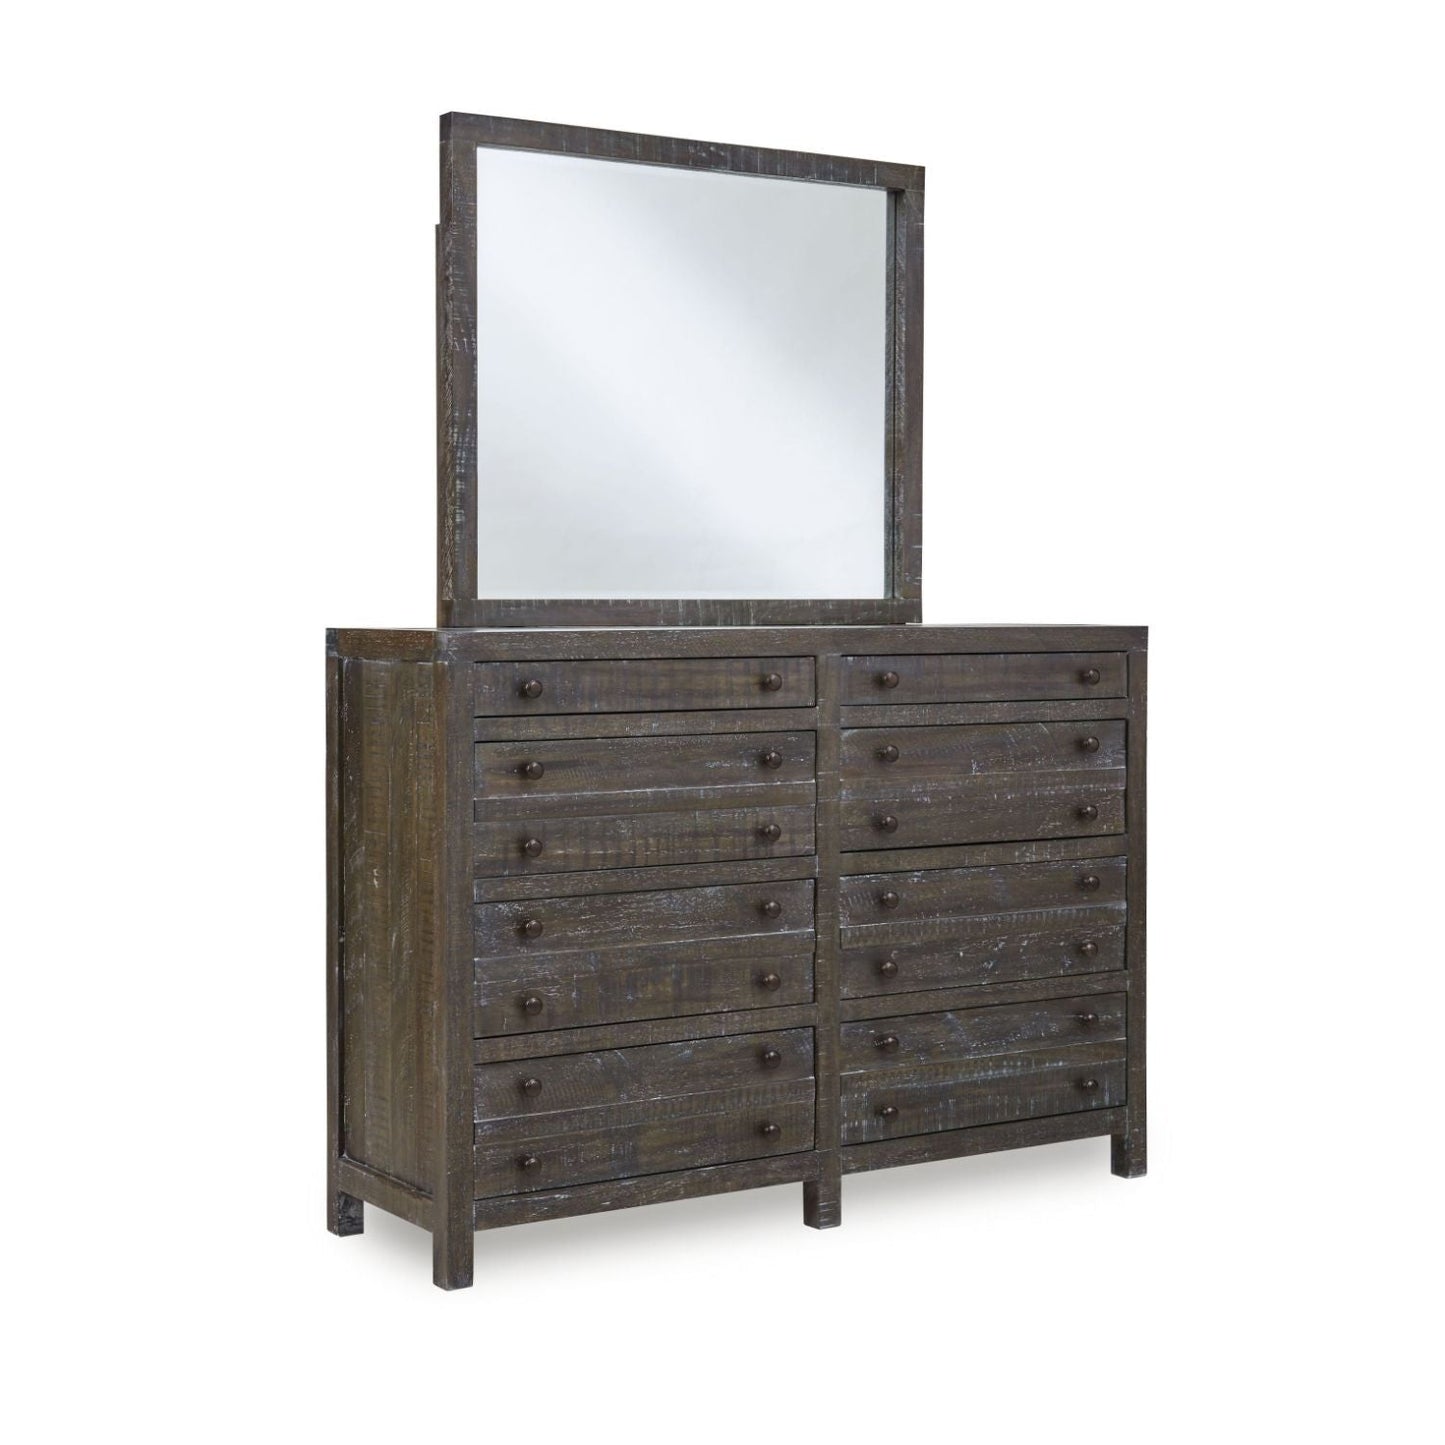 Modus Townsend 5PC Queen Low-Profile Bedroom Set with Chest in Gunmetal